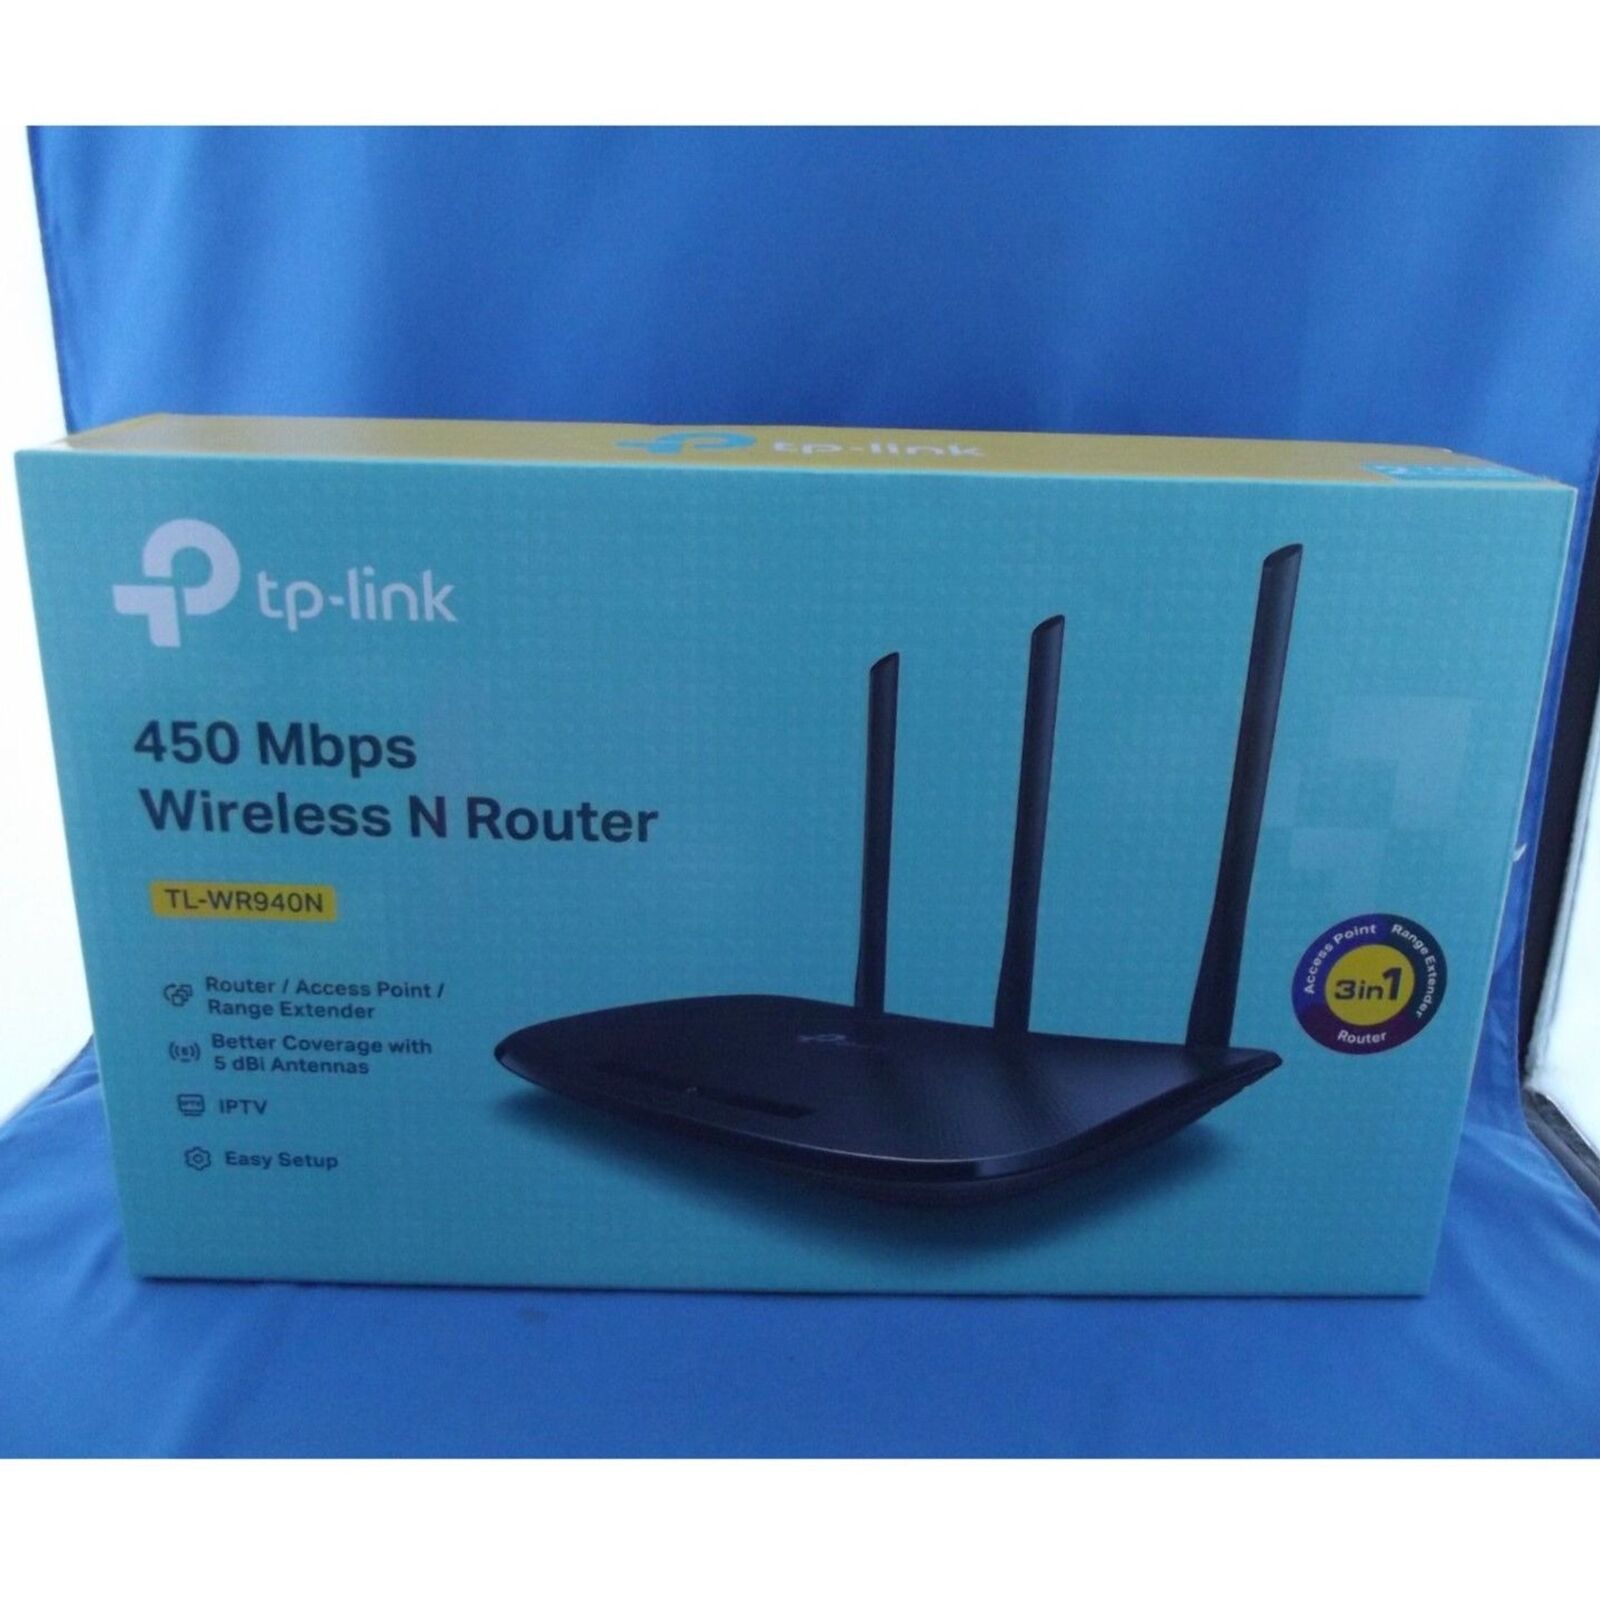 TP-LINK TL-WR940N 450mbps Wireless N Router - Open Box - Components in Plastics